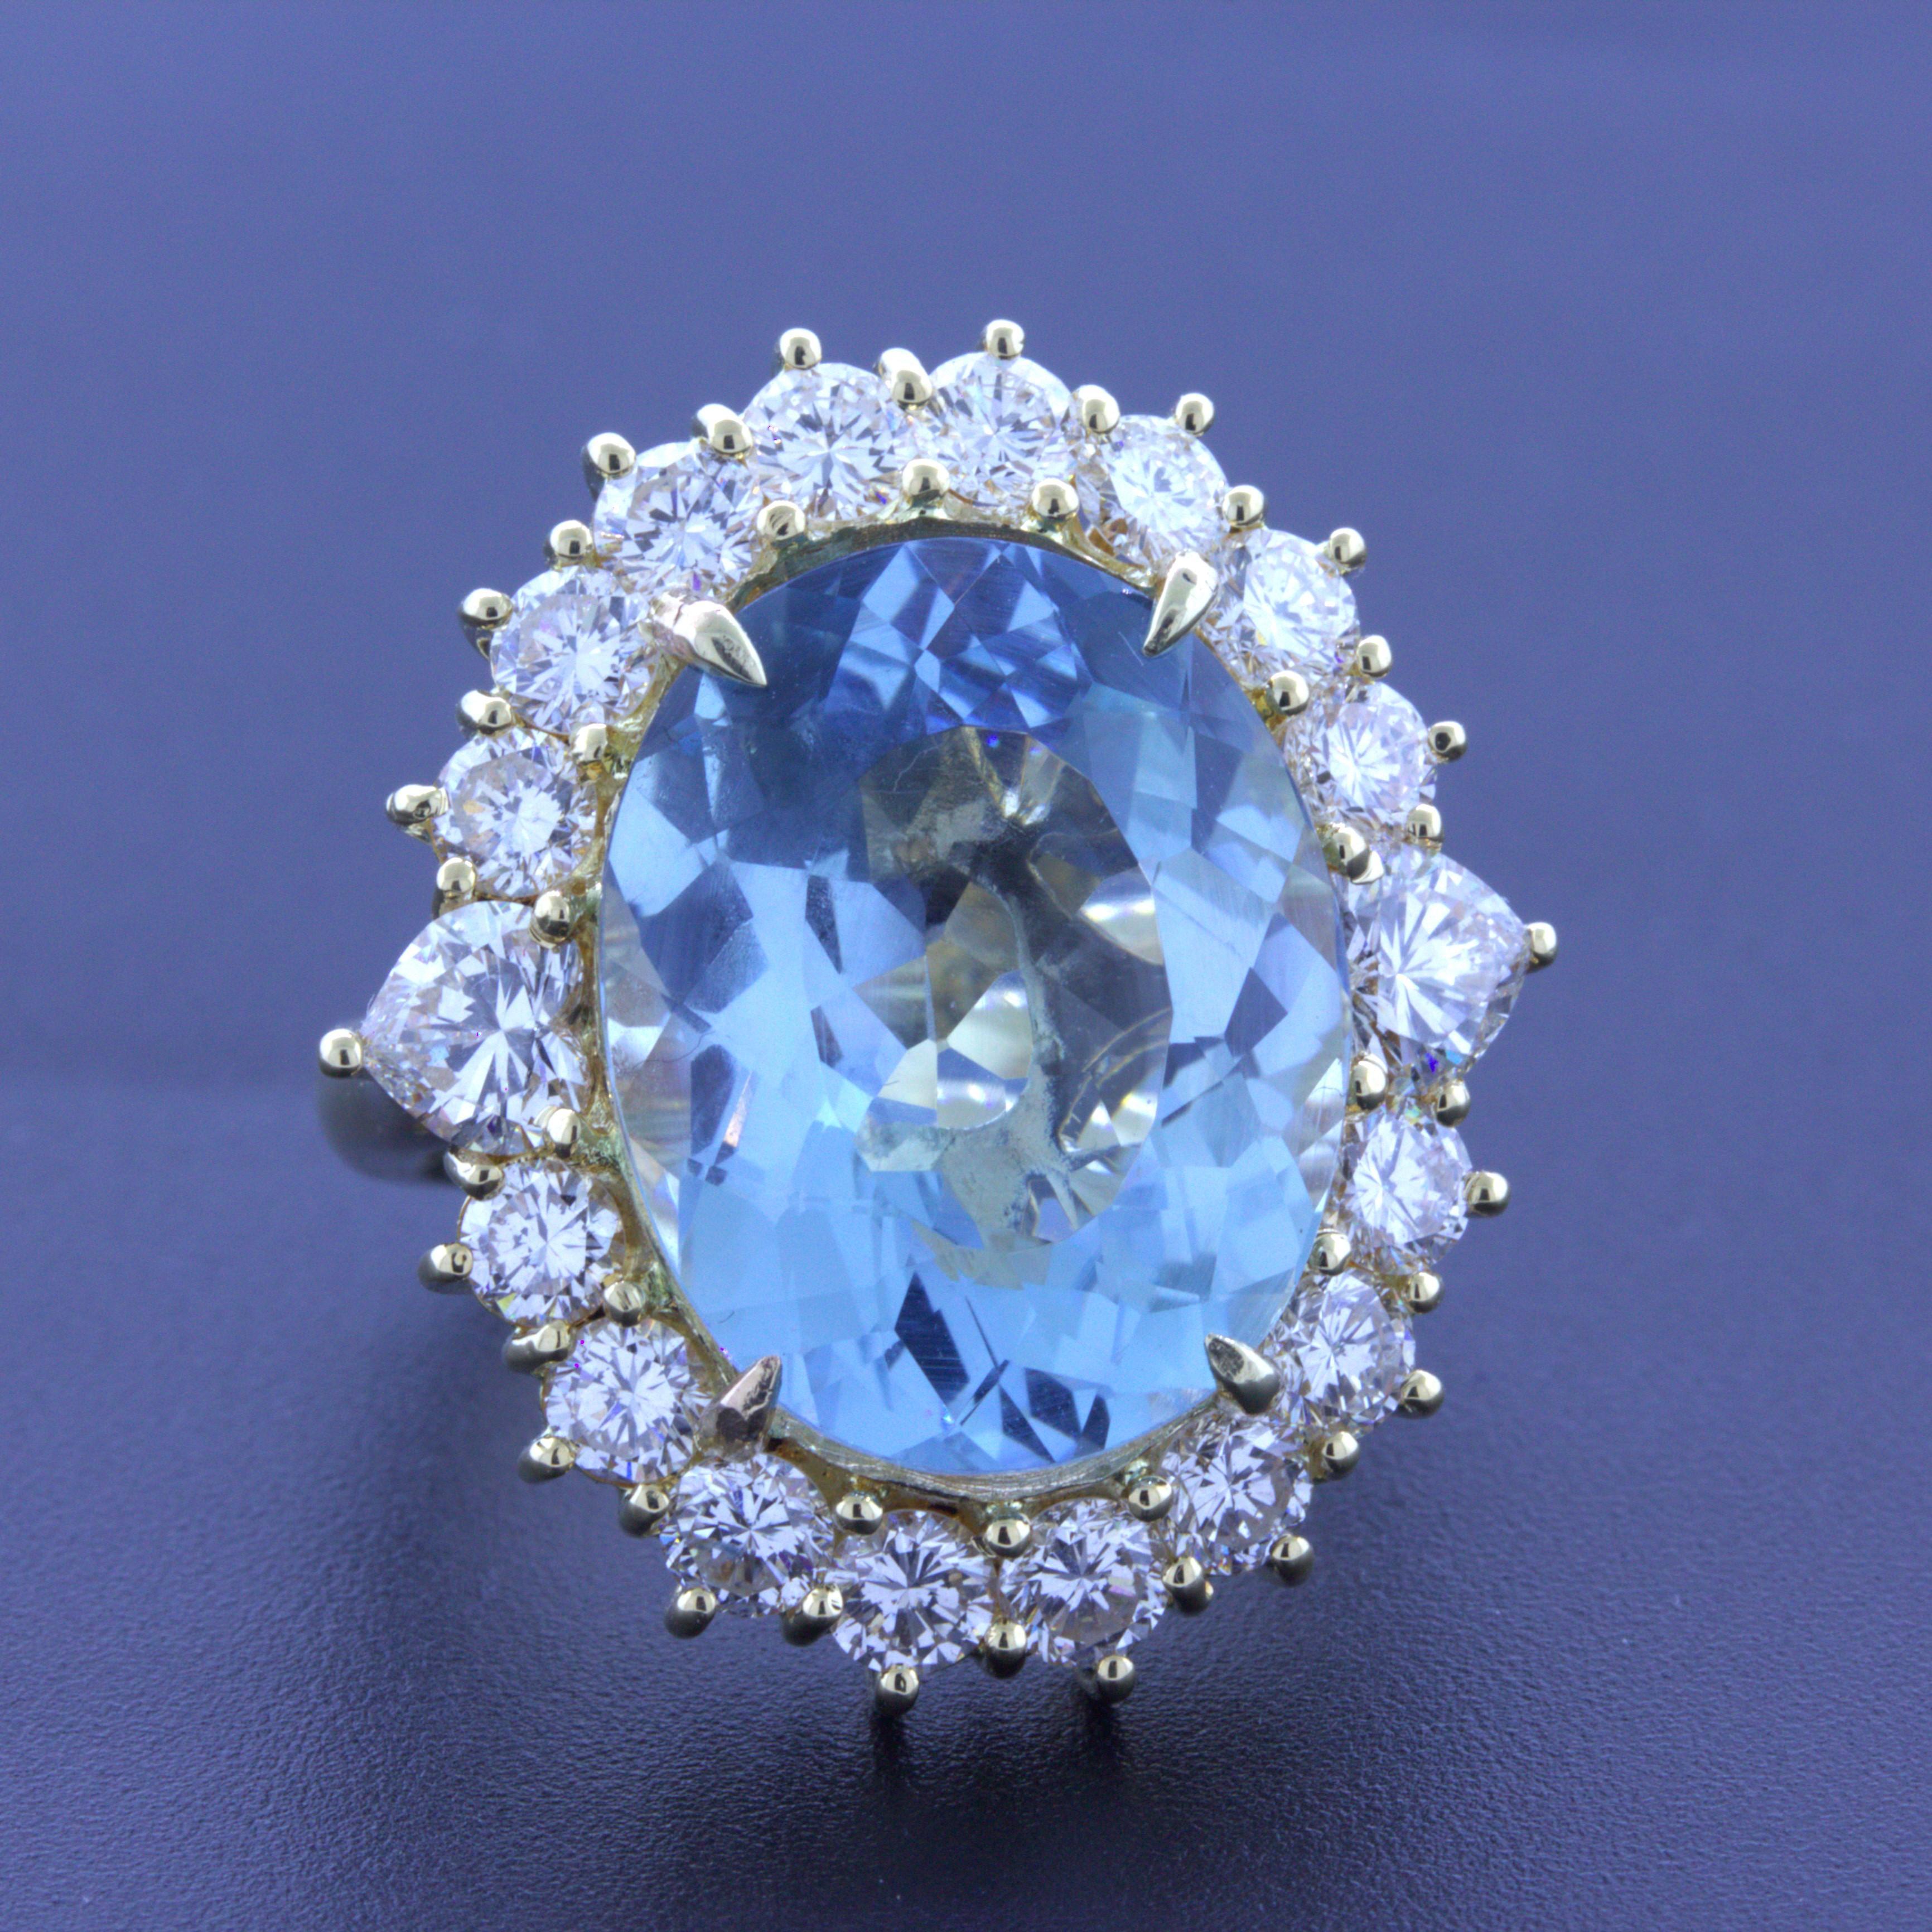 A lovely 18k yellow gold cocktail ring featuring a large 10.60 carat aquamarine. The oval-shape aqua has the classic sea-blue color it is famous for while being extremely clean with no visible inclusions allowing it to shine brightly. It is